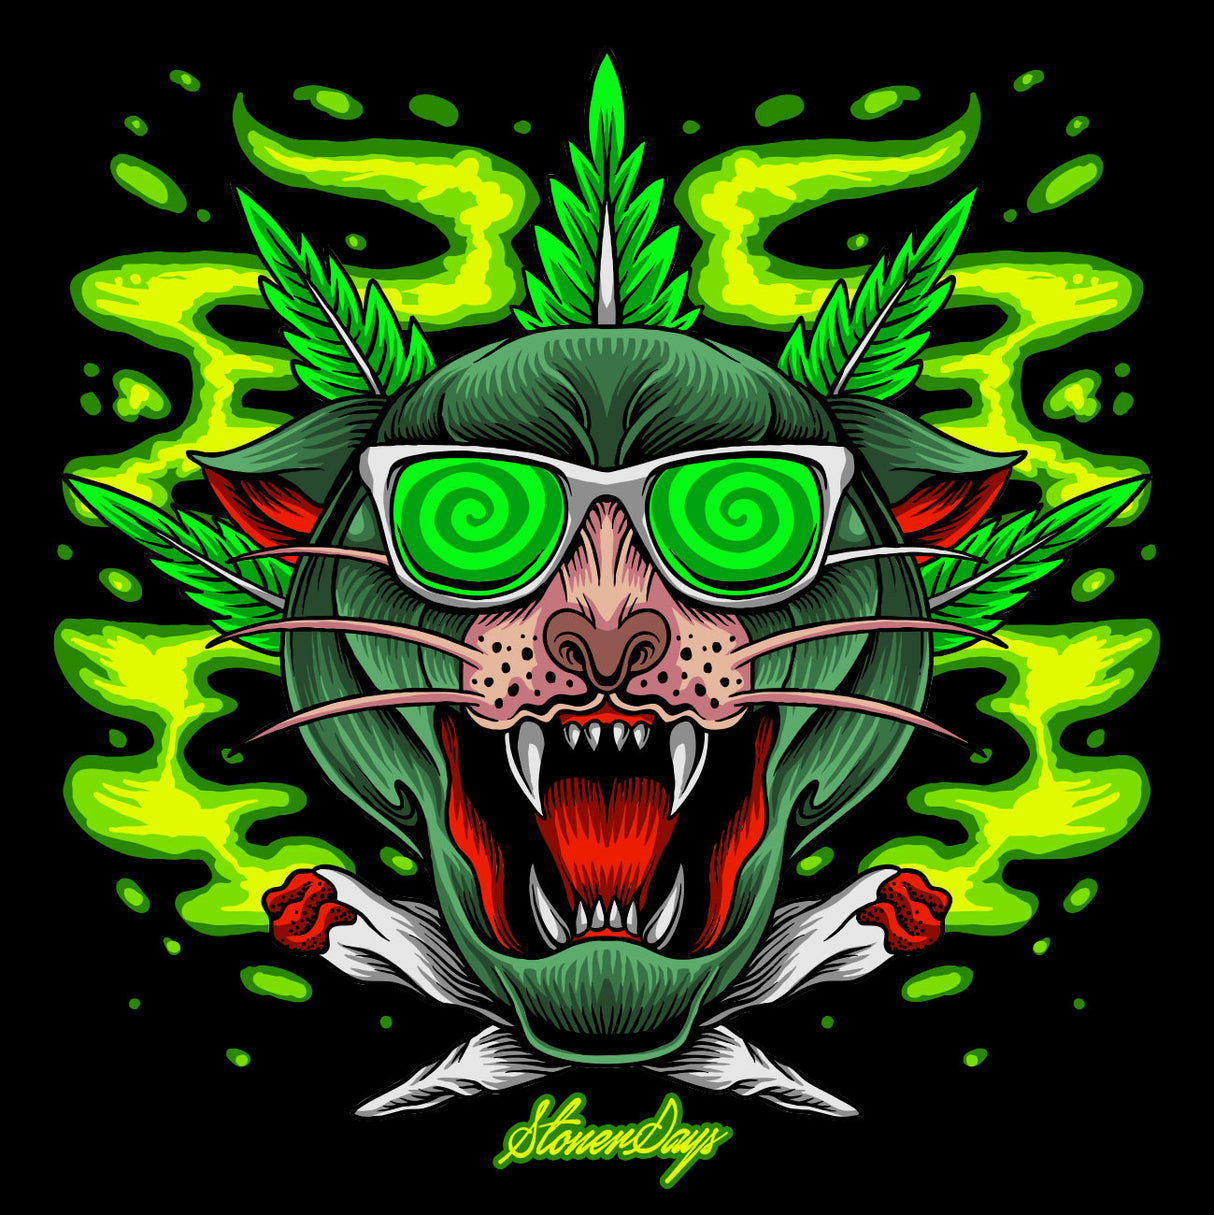 StonerDays Greenz Panther Tee featuring vibrant green panther graphic on black cotton, size options available